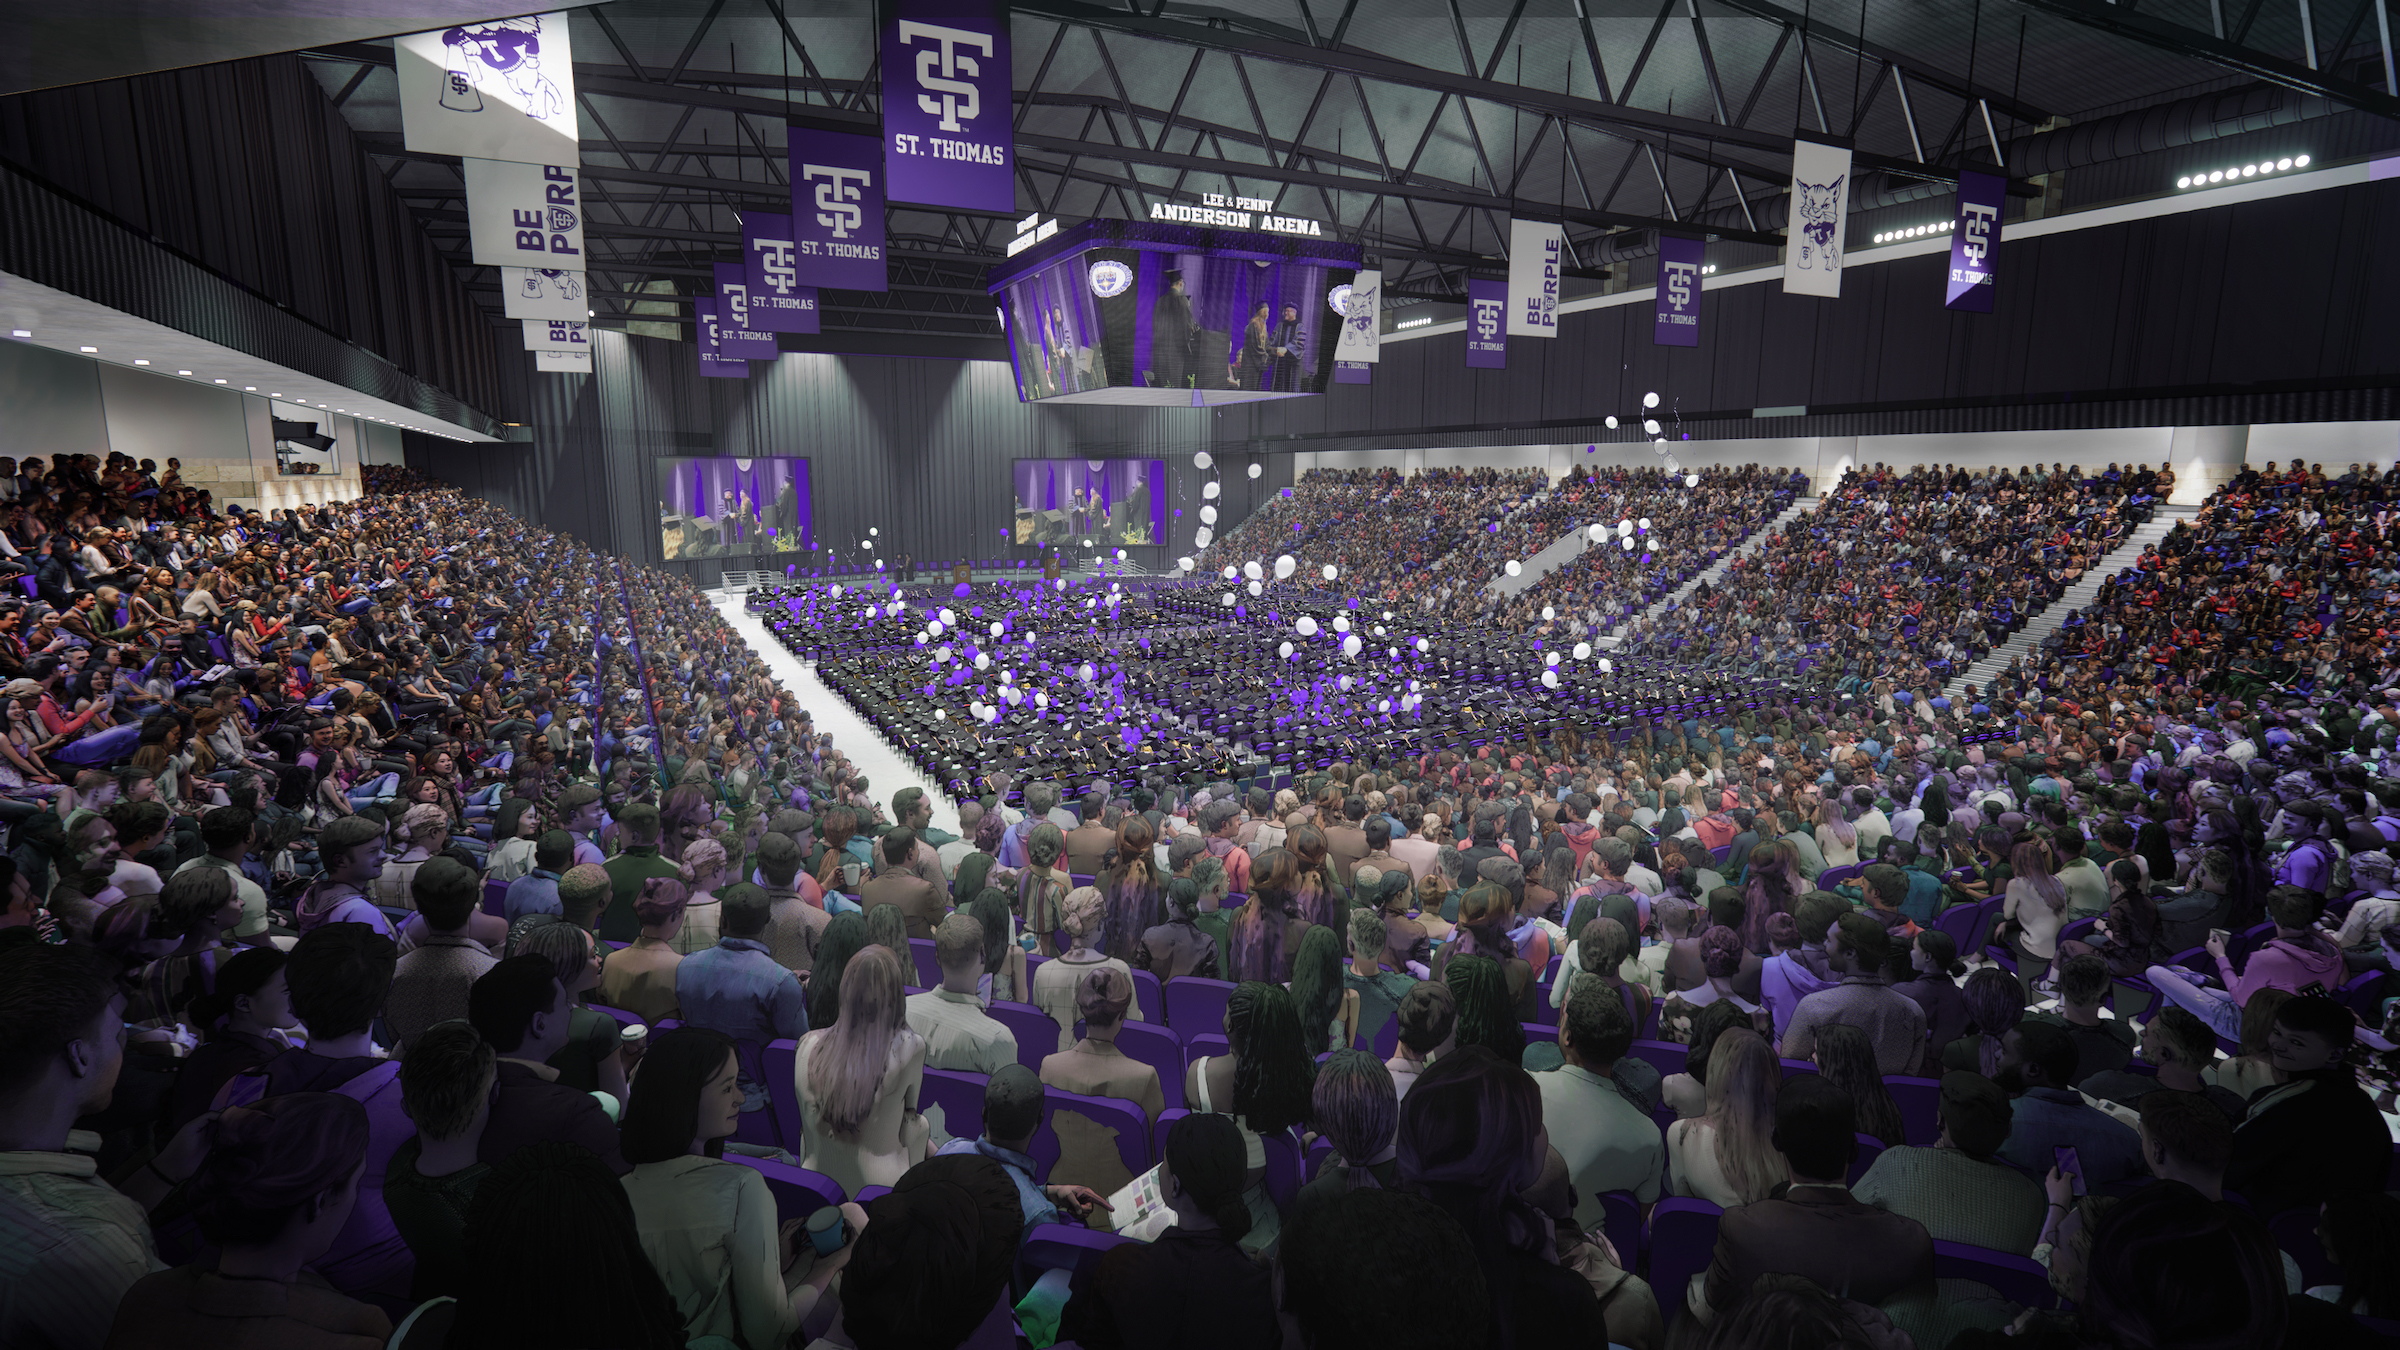 University of St. Thomas Lee and Penny Anderson Arena Renderings courtesy Ryan Companies, Crawford Architects - Graduation ceremony